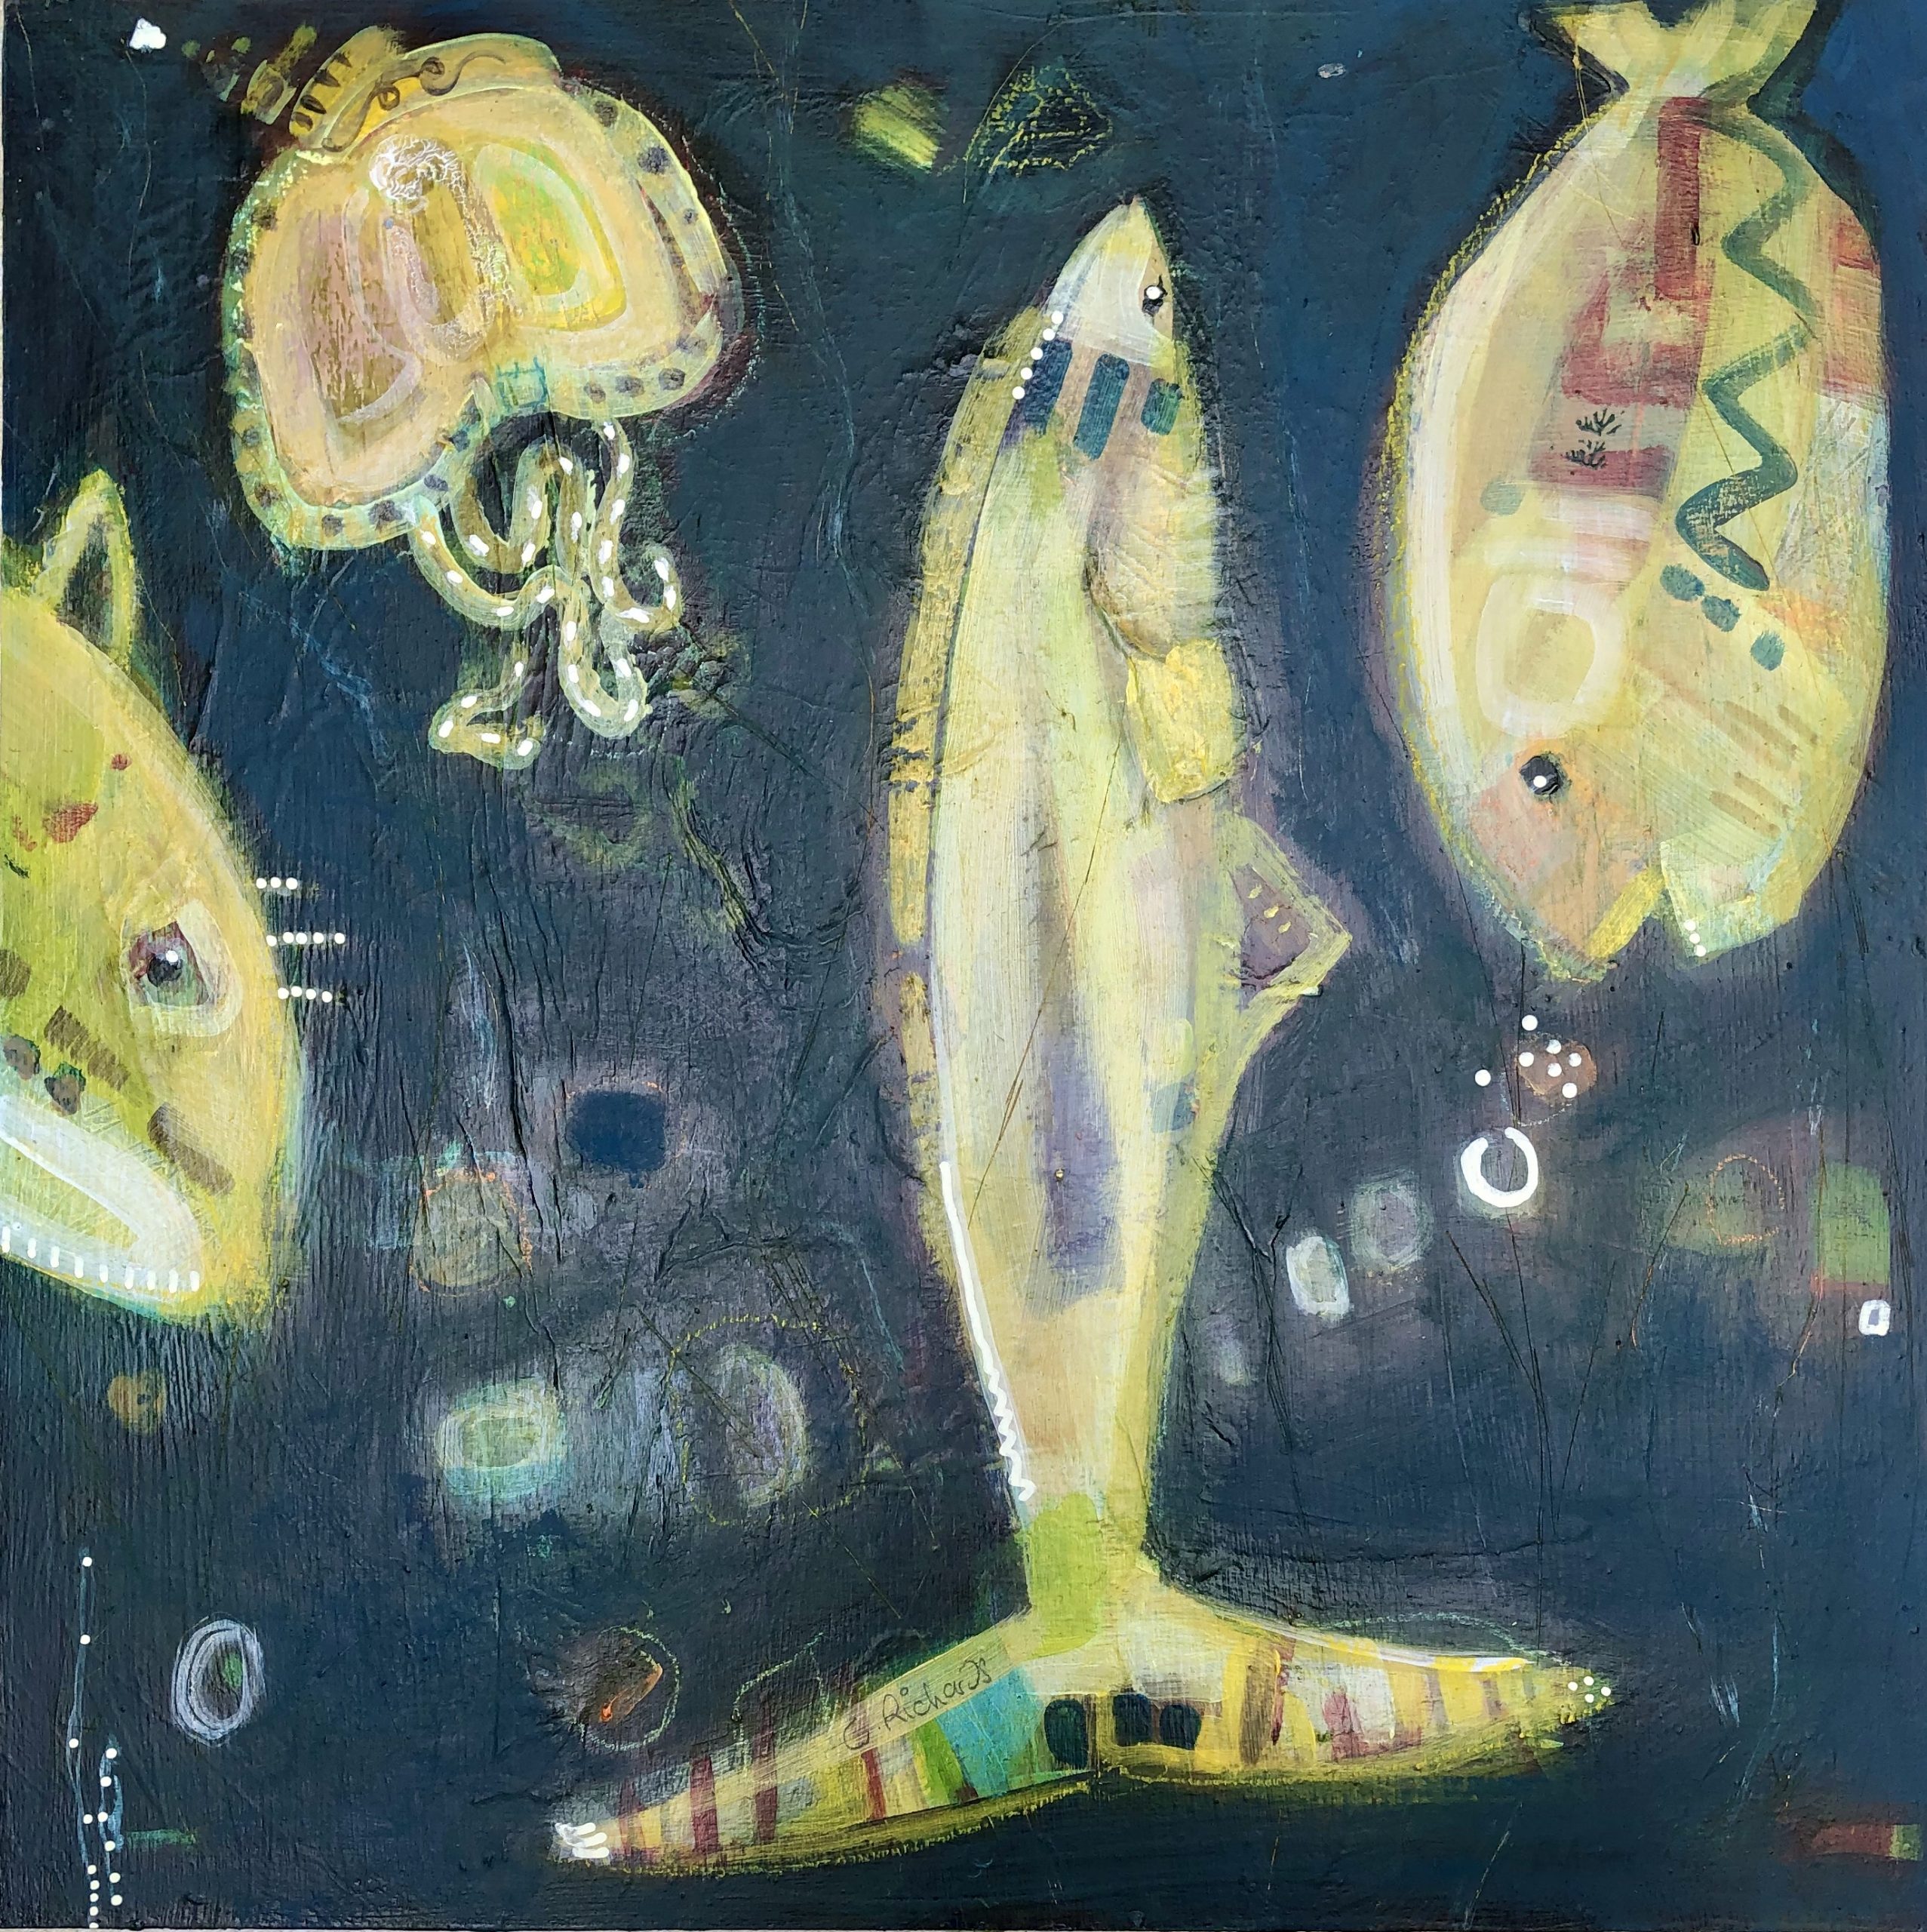 painting fish in sea abstract by Chrissie Richards The North Sea II - 40 x 40 cm - Mixed Media on Board